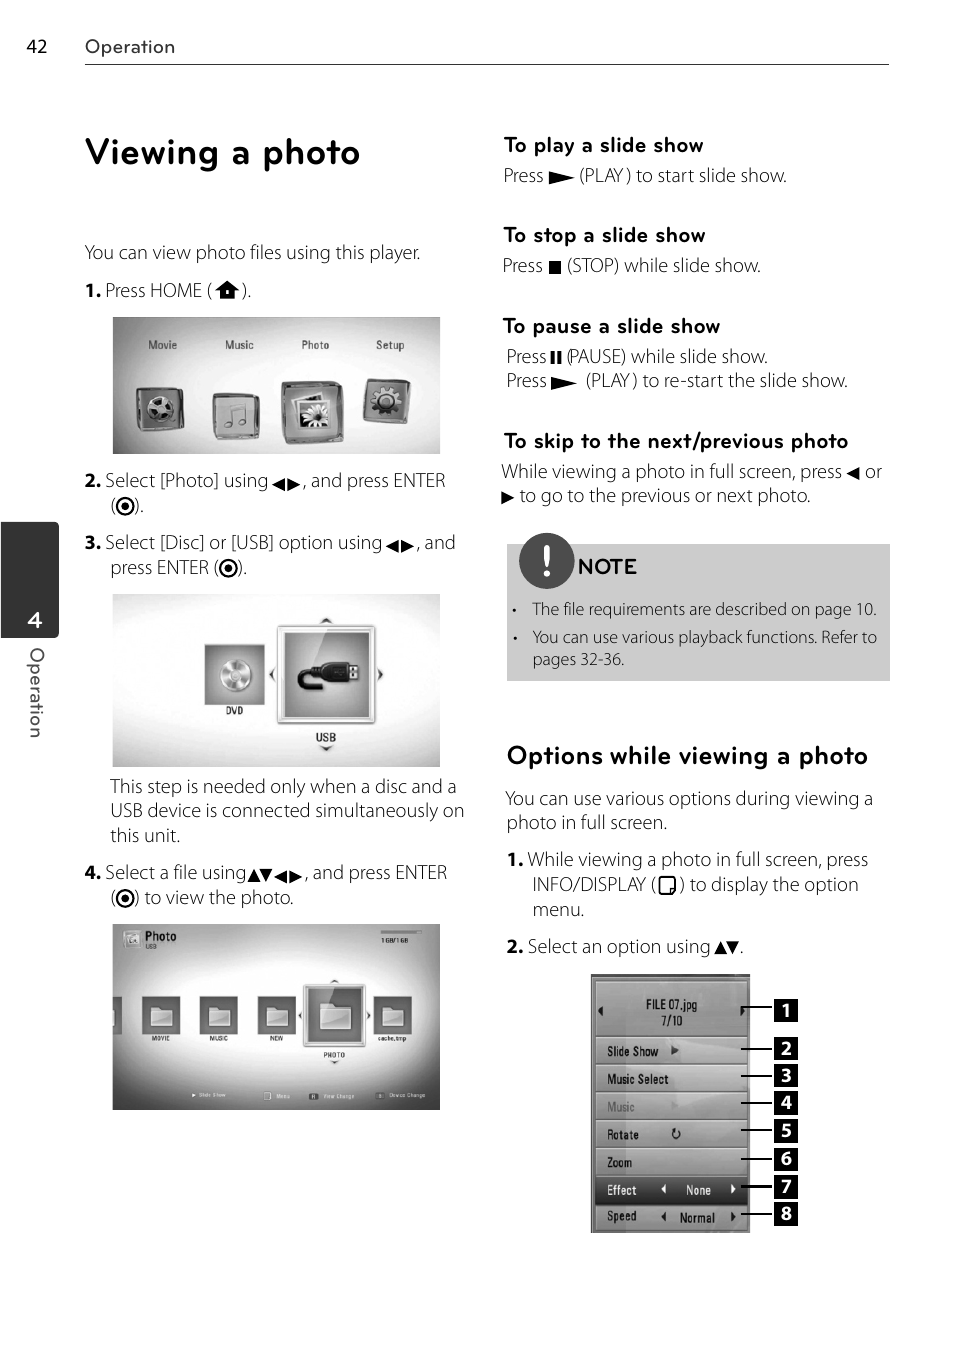 Viewing a photo, Options while viewing a photo | LG BD678N User Manual | Page 42 / 72